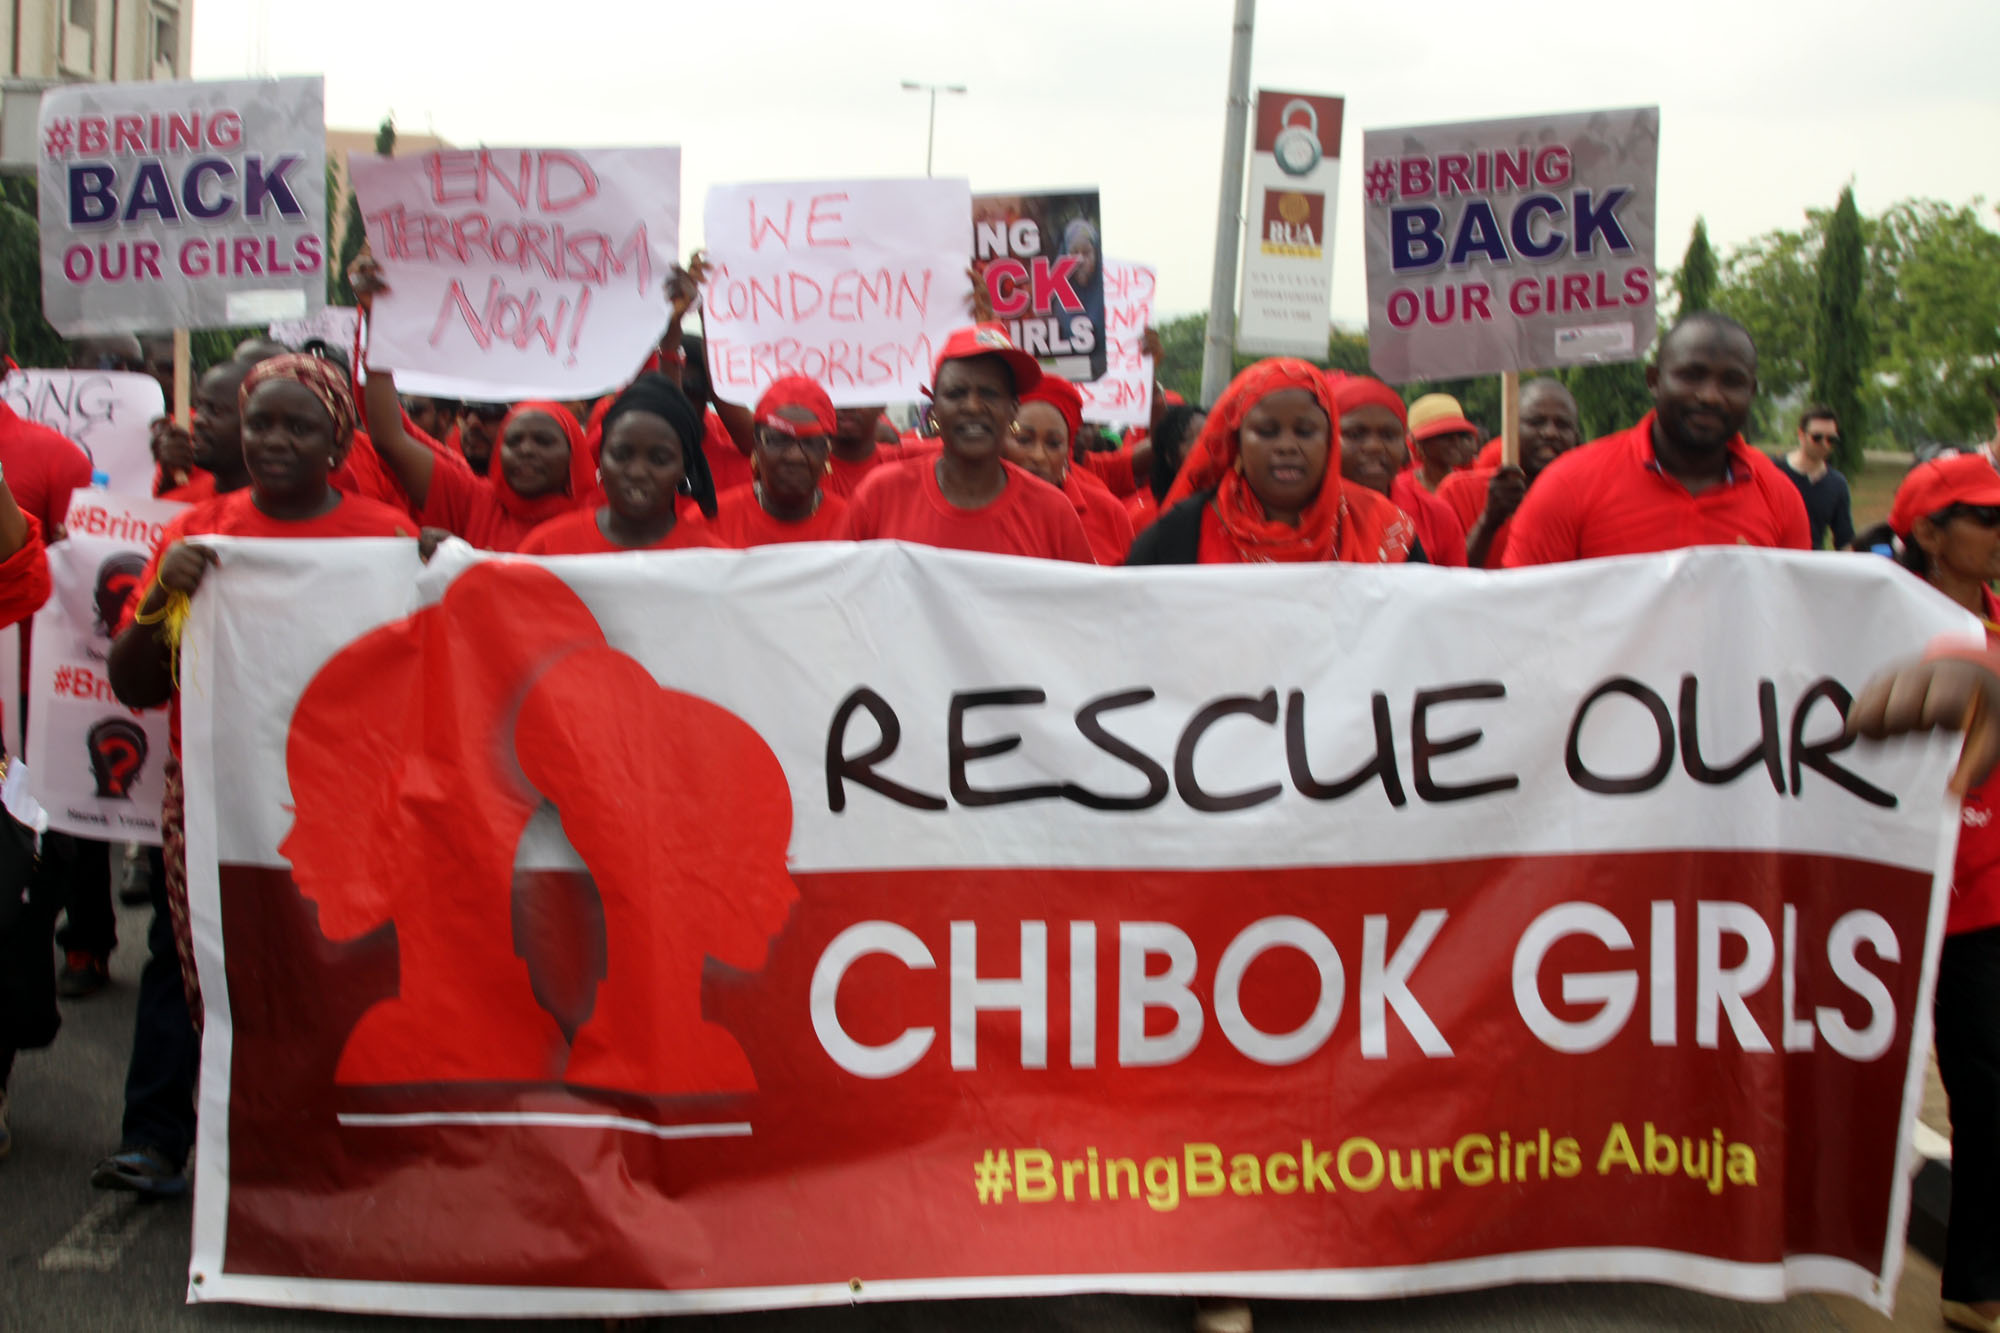 Nigeria Faces Mounting Pressure to Rescue Girls Abducted By Boko Haram 1,000 Days Ago